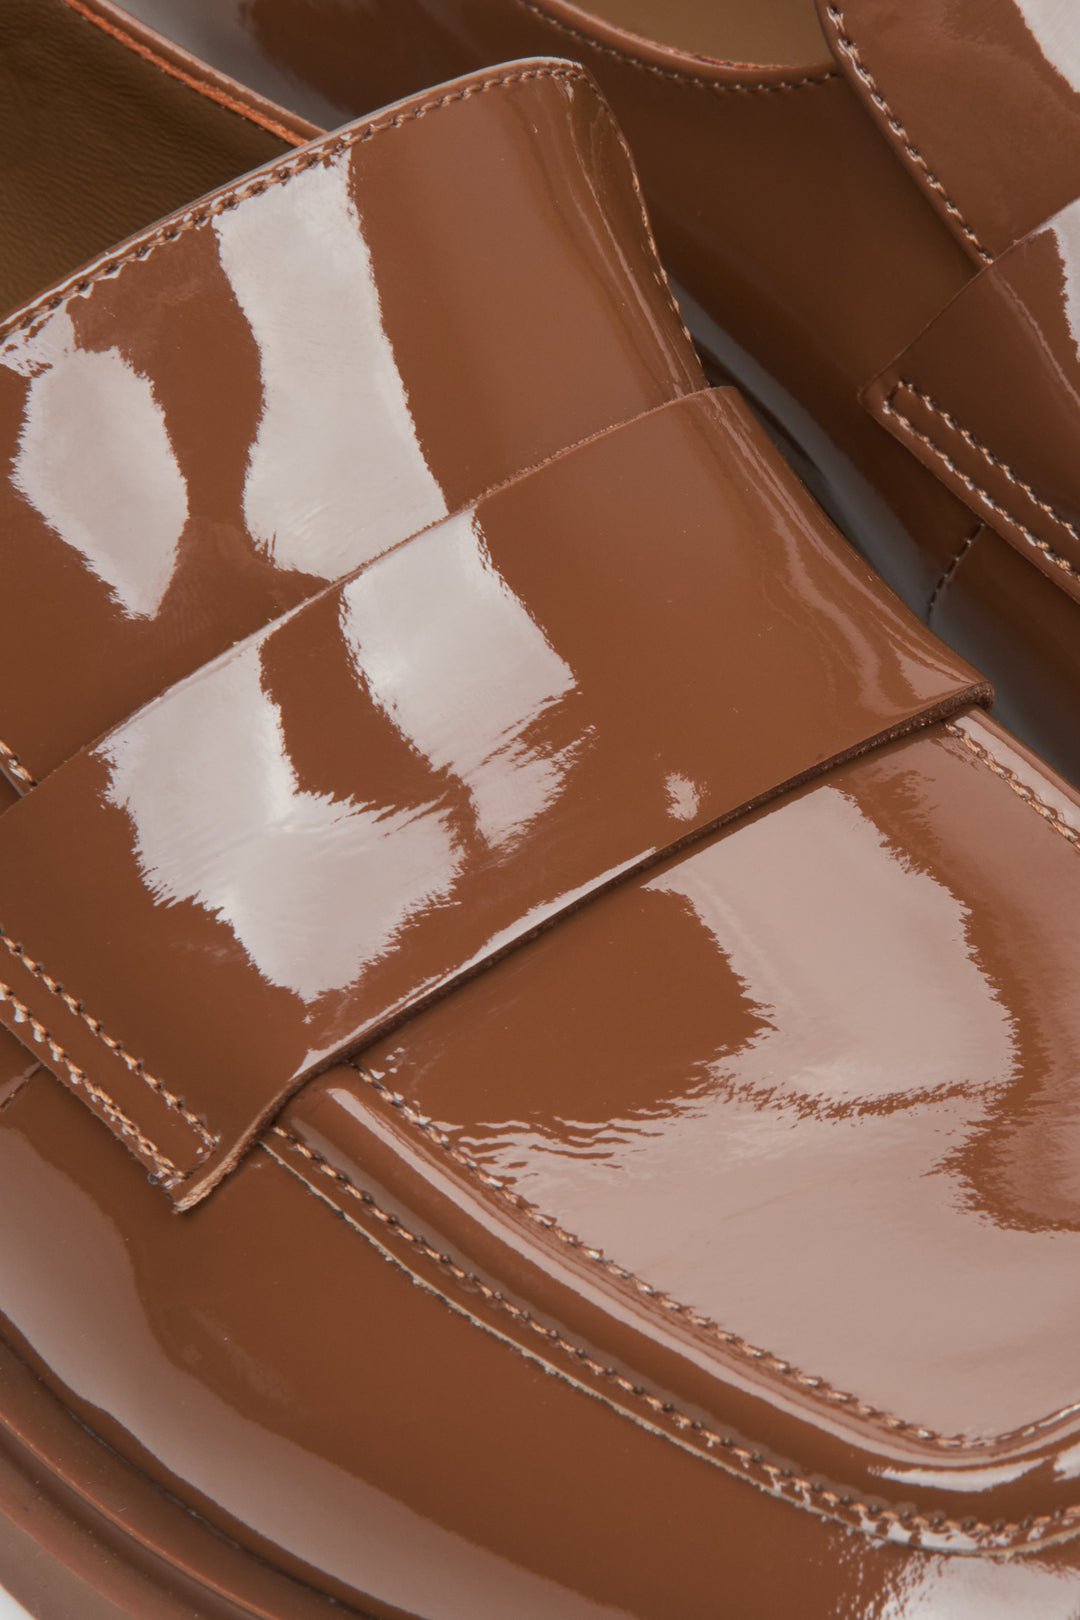 Women's brown patent leather moccasins by Estro - close-up on details.